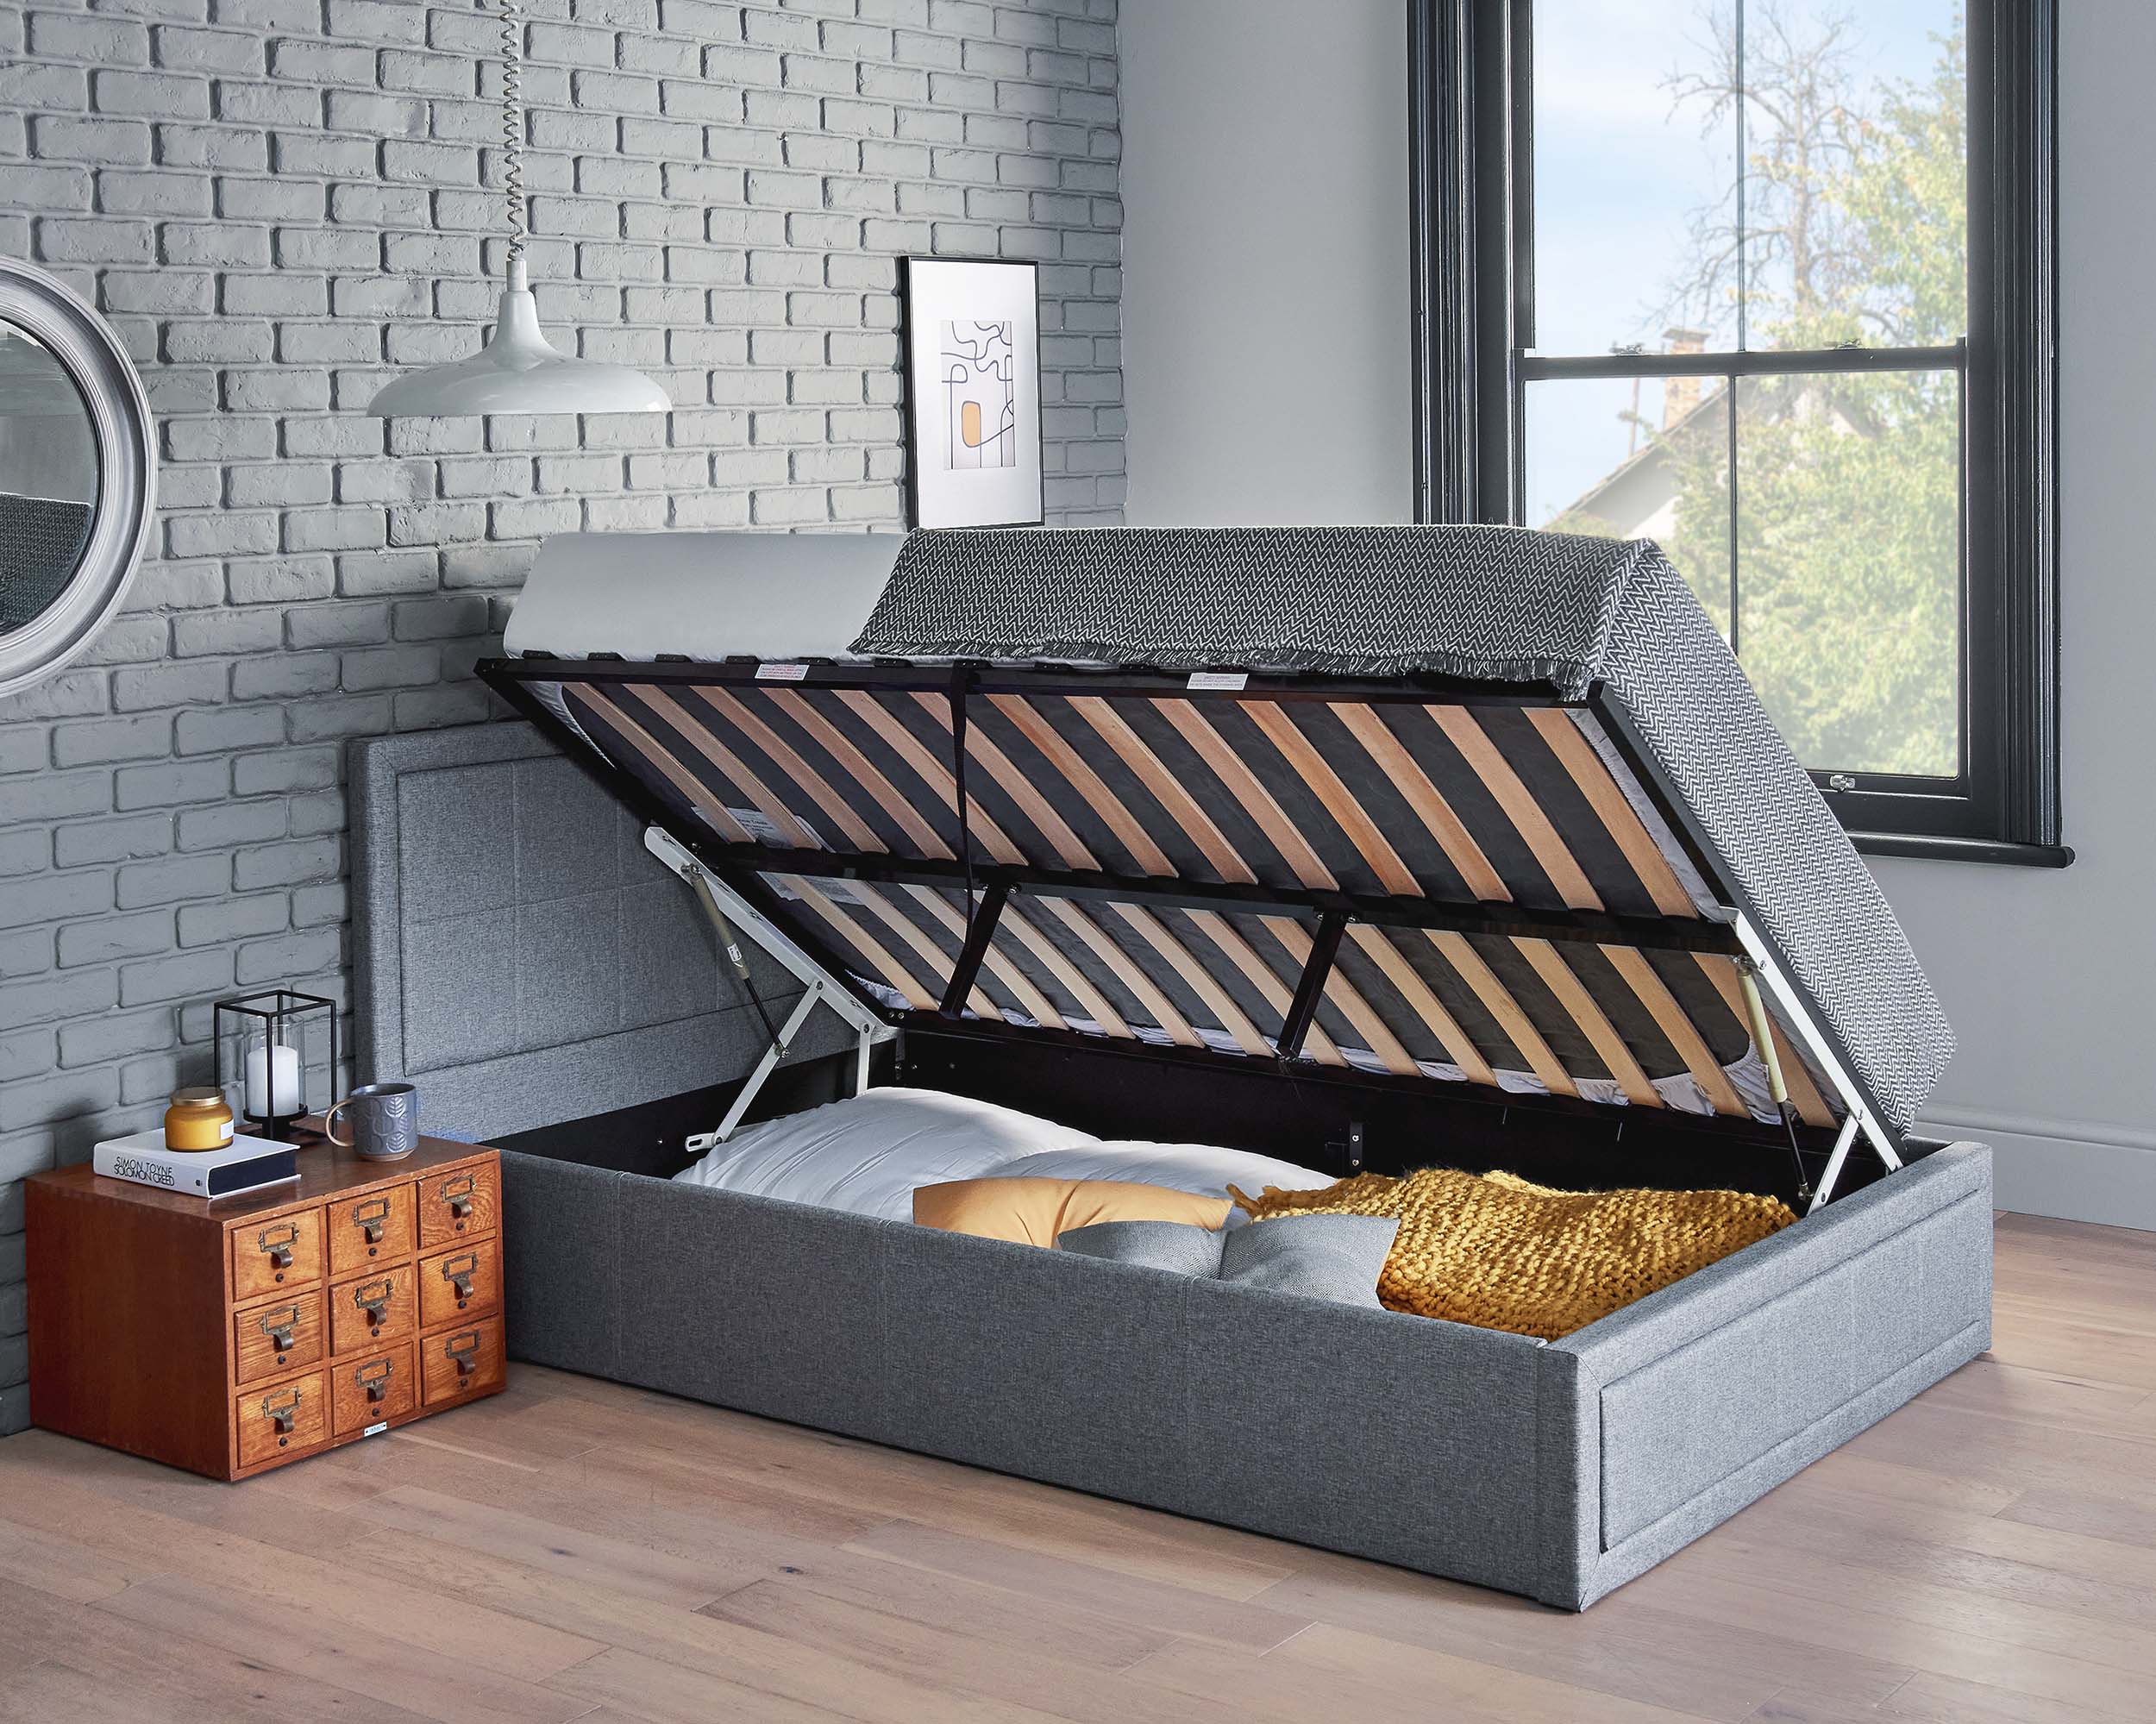 double sofa bed with storage underneath